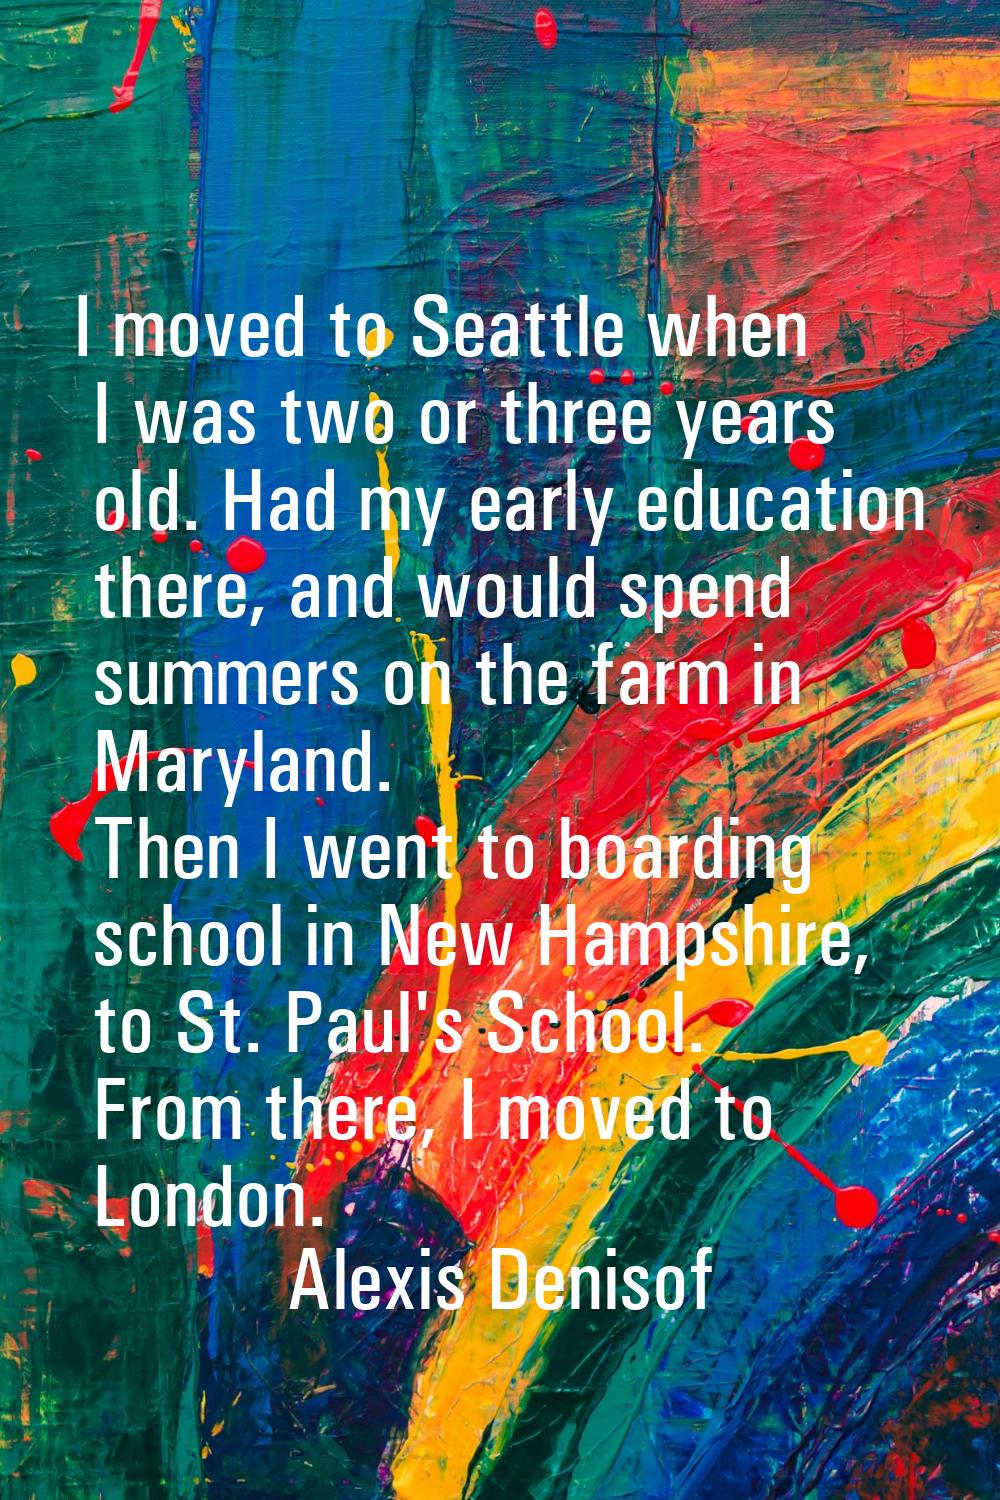 I moved to Seattle when I was two or three years old. Had my early education there, and would spend